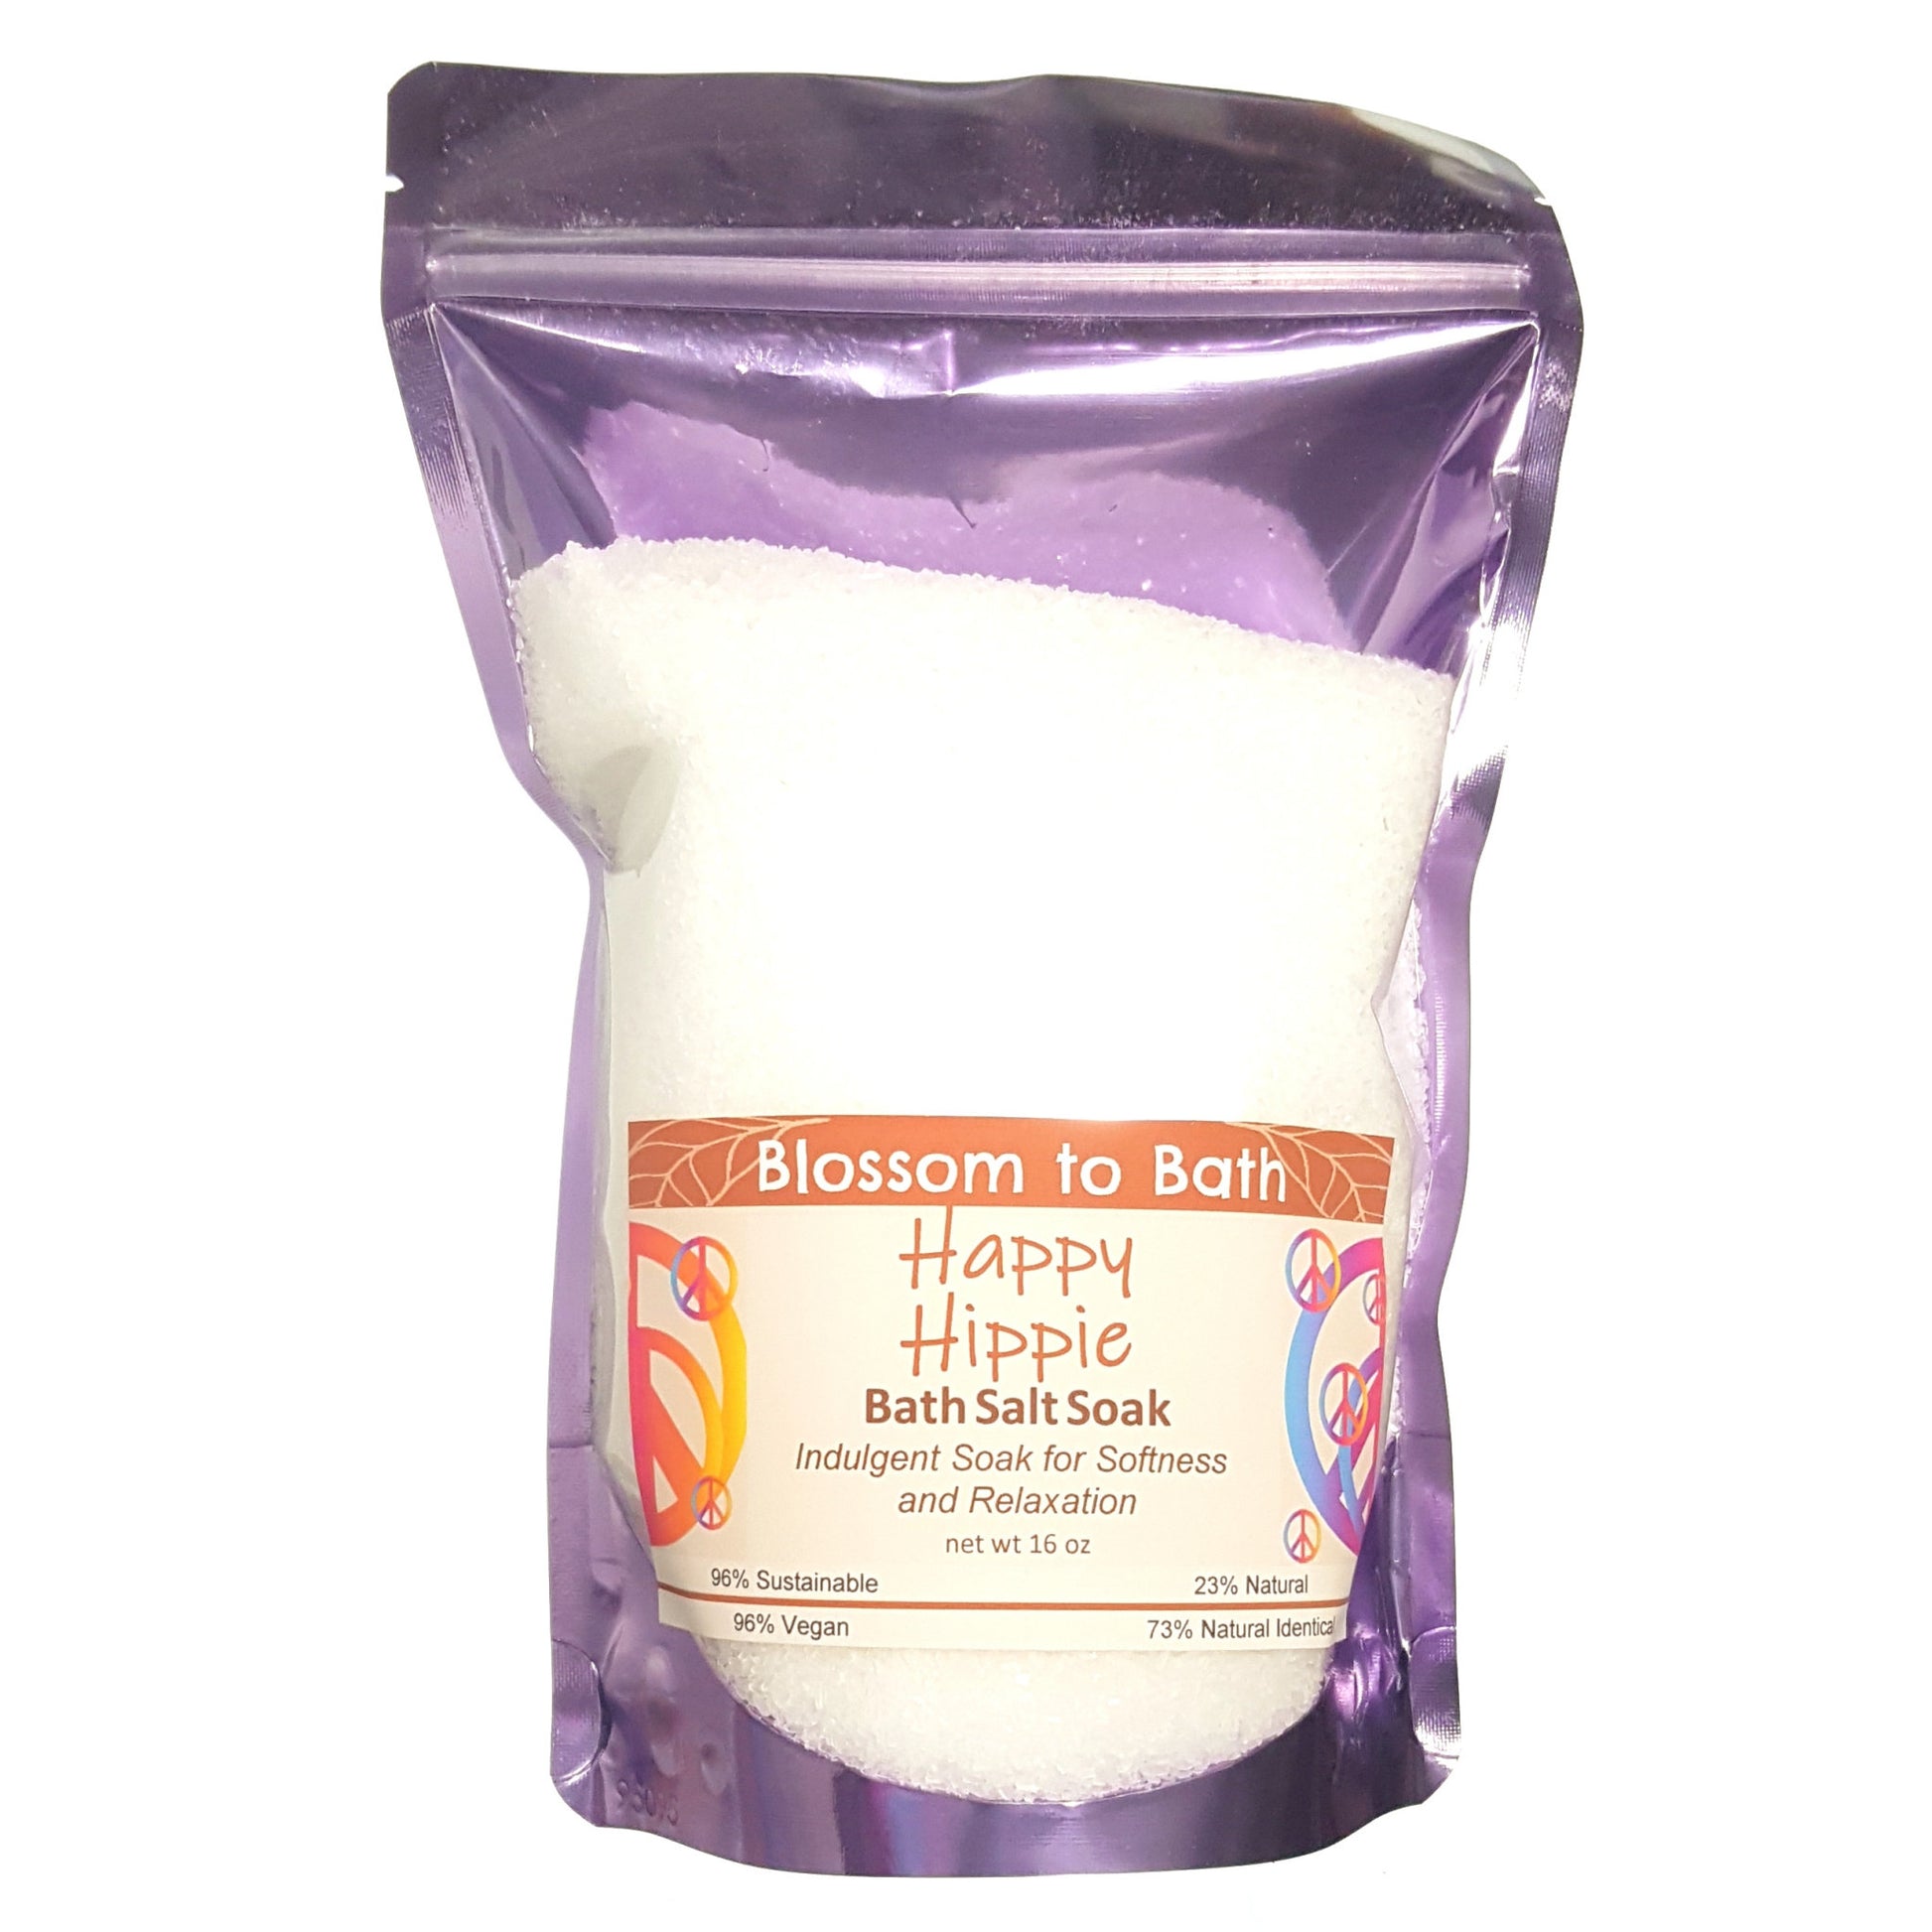 Buy Blossom to Bath Happy Hippie Bath Salt Soak from Flowersong Soap Studio.  Scented epsom salts for a luxurious soaking experience  A refreshing herbal fragrance that elevates your mood and your perspective.